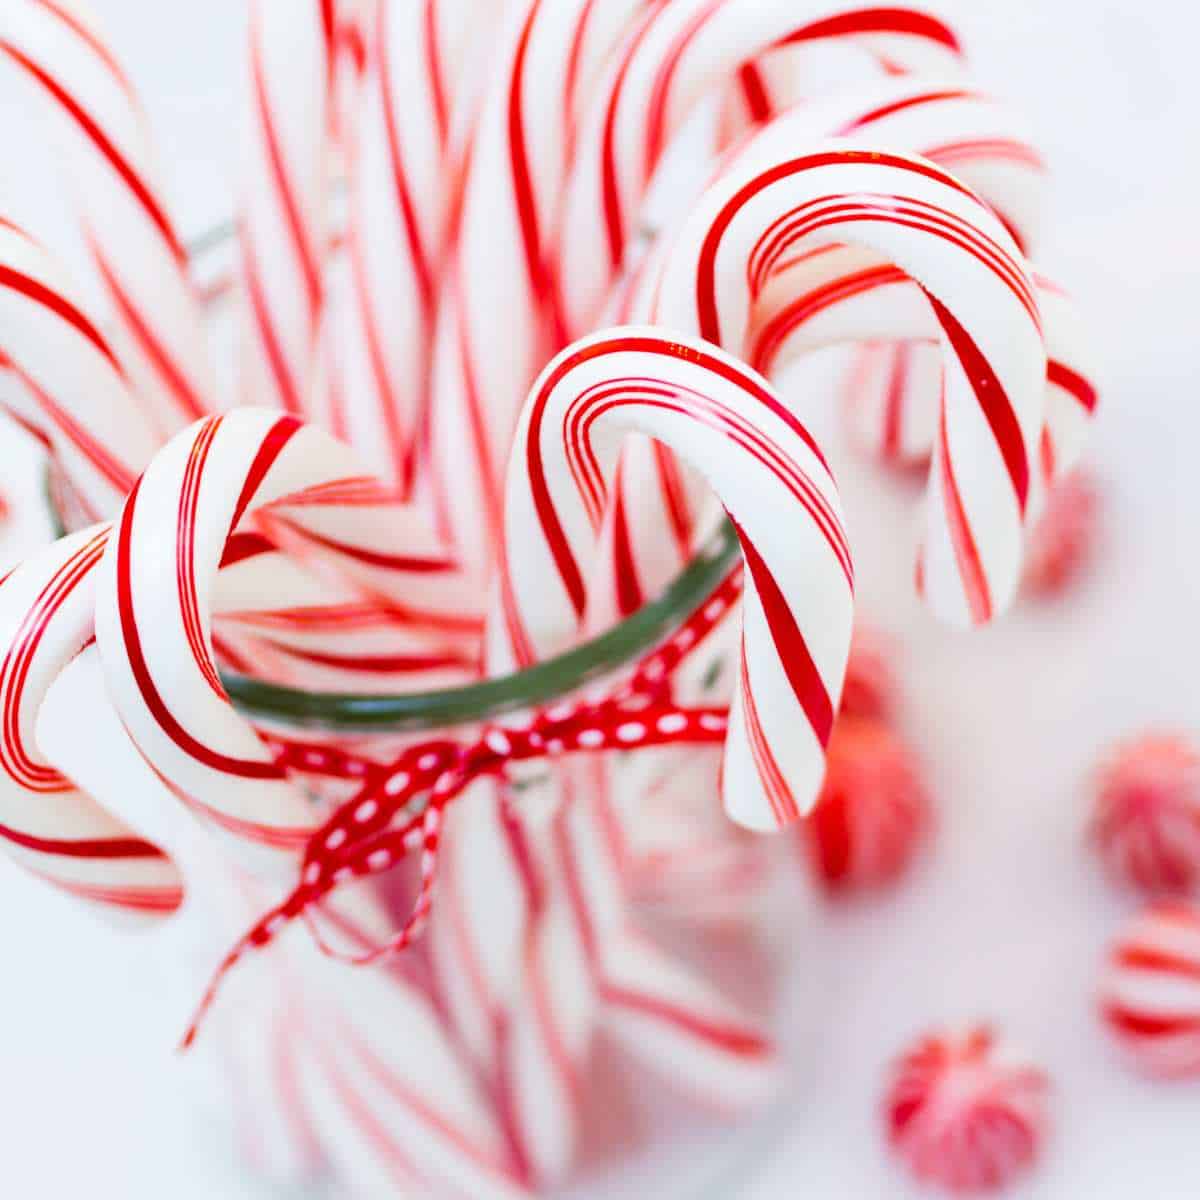 Red and white candy canes in a jar.